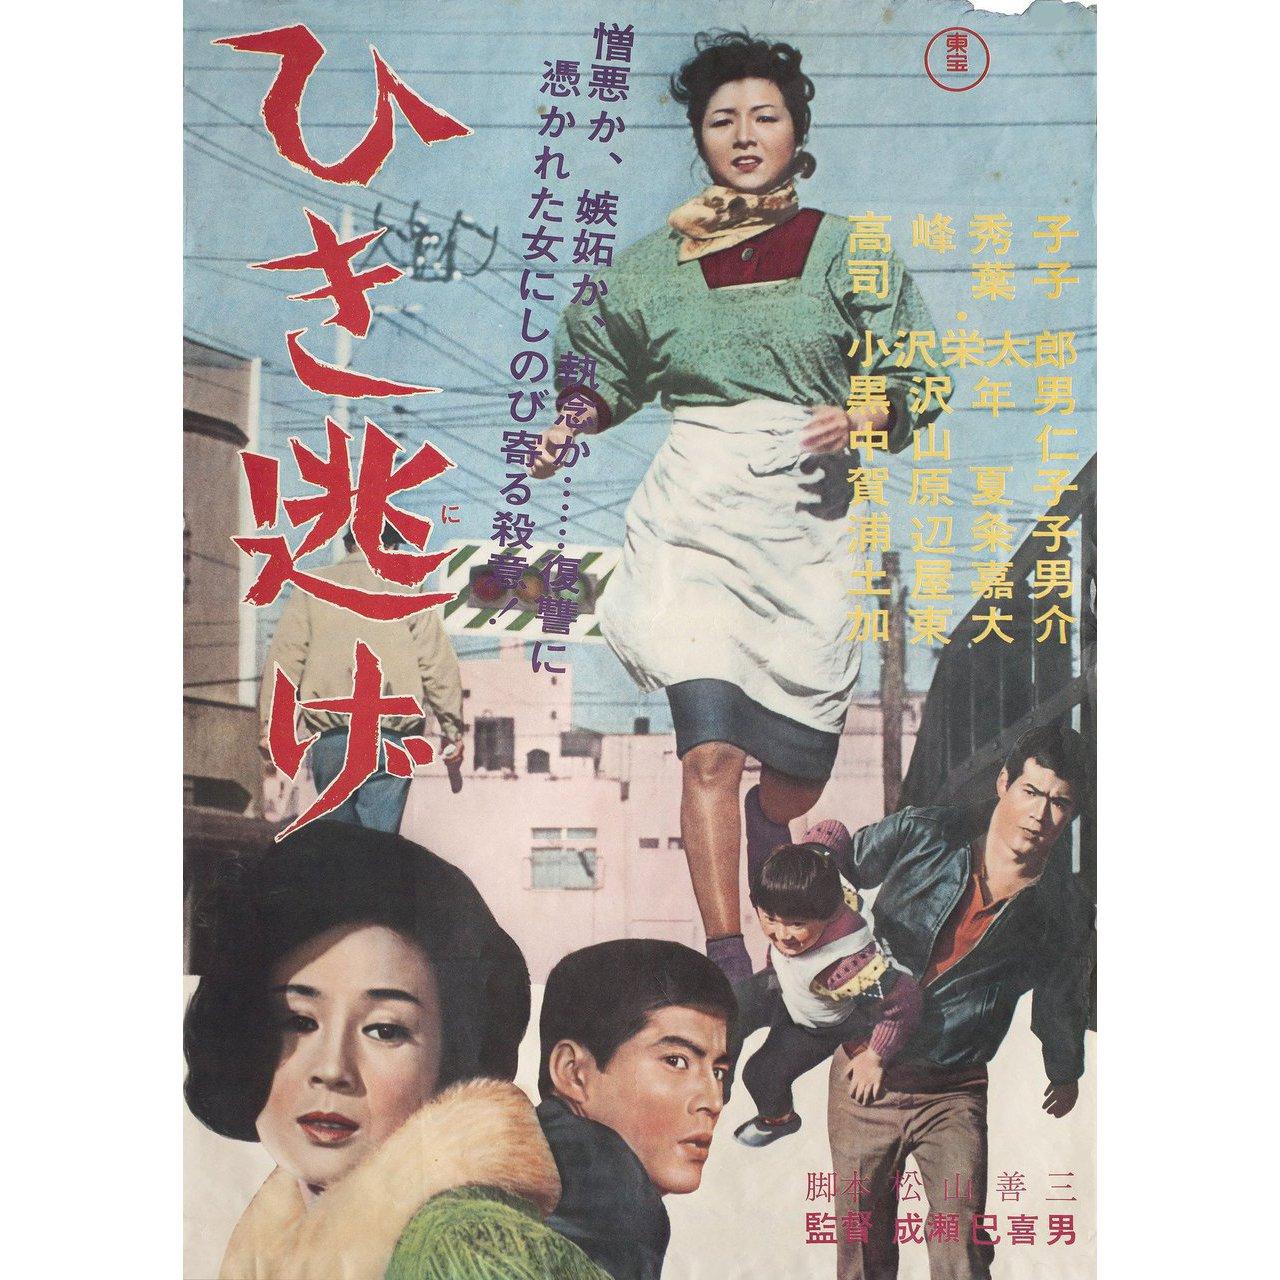 Original 1966 Japanese B2 poster for. Very good-fine condition, folded with tape stain. Many original posters were issued folded or were subsequently folded. Please note: the size is stated in inches and the actual size can vary by an inch or